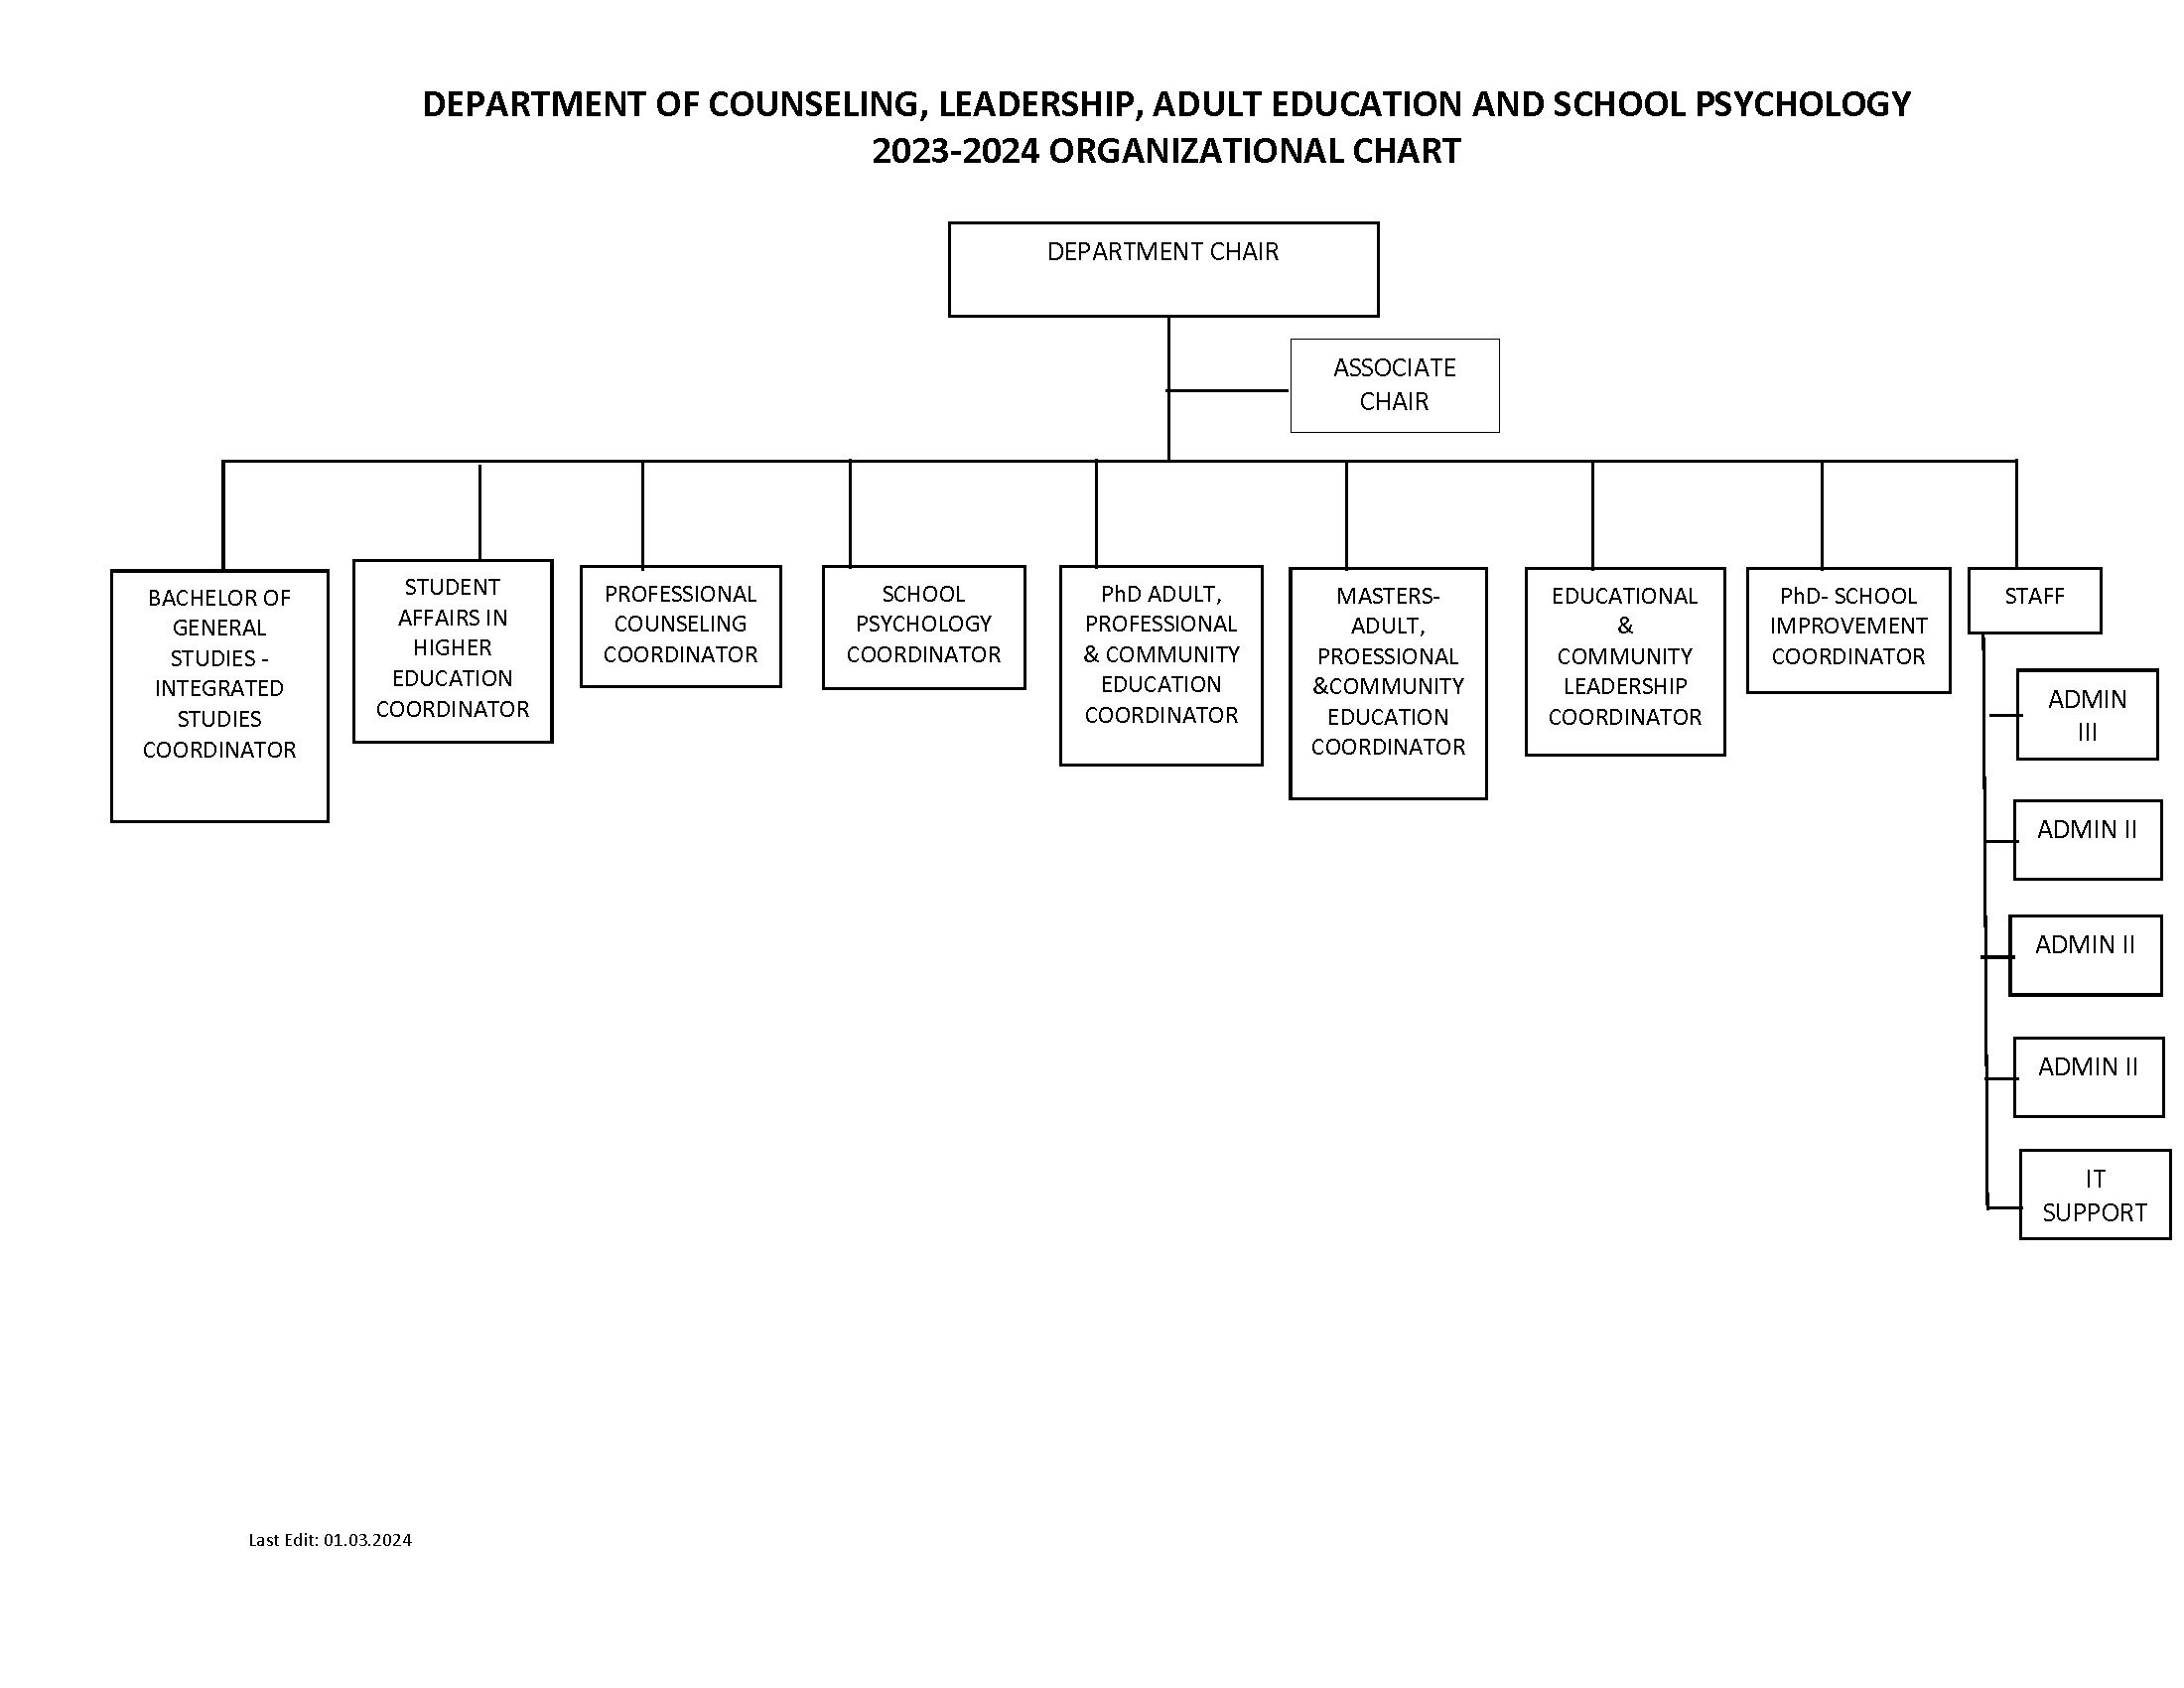 Organizational char for CLAS Department